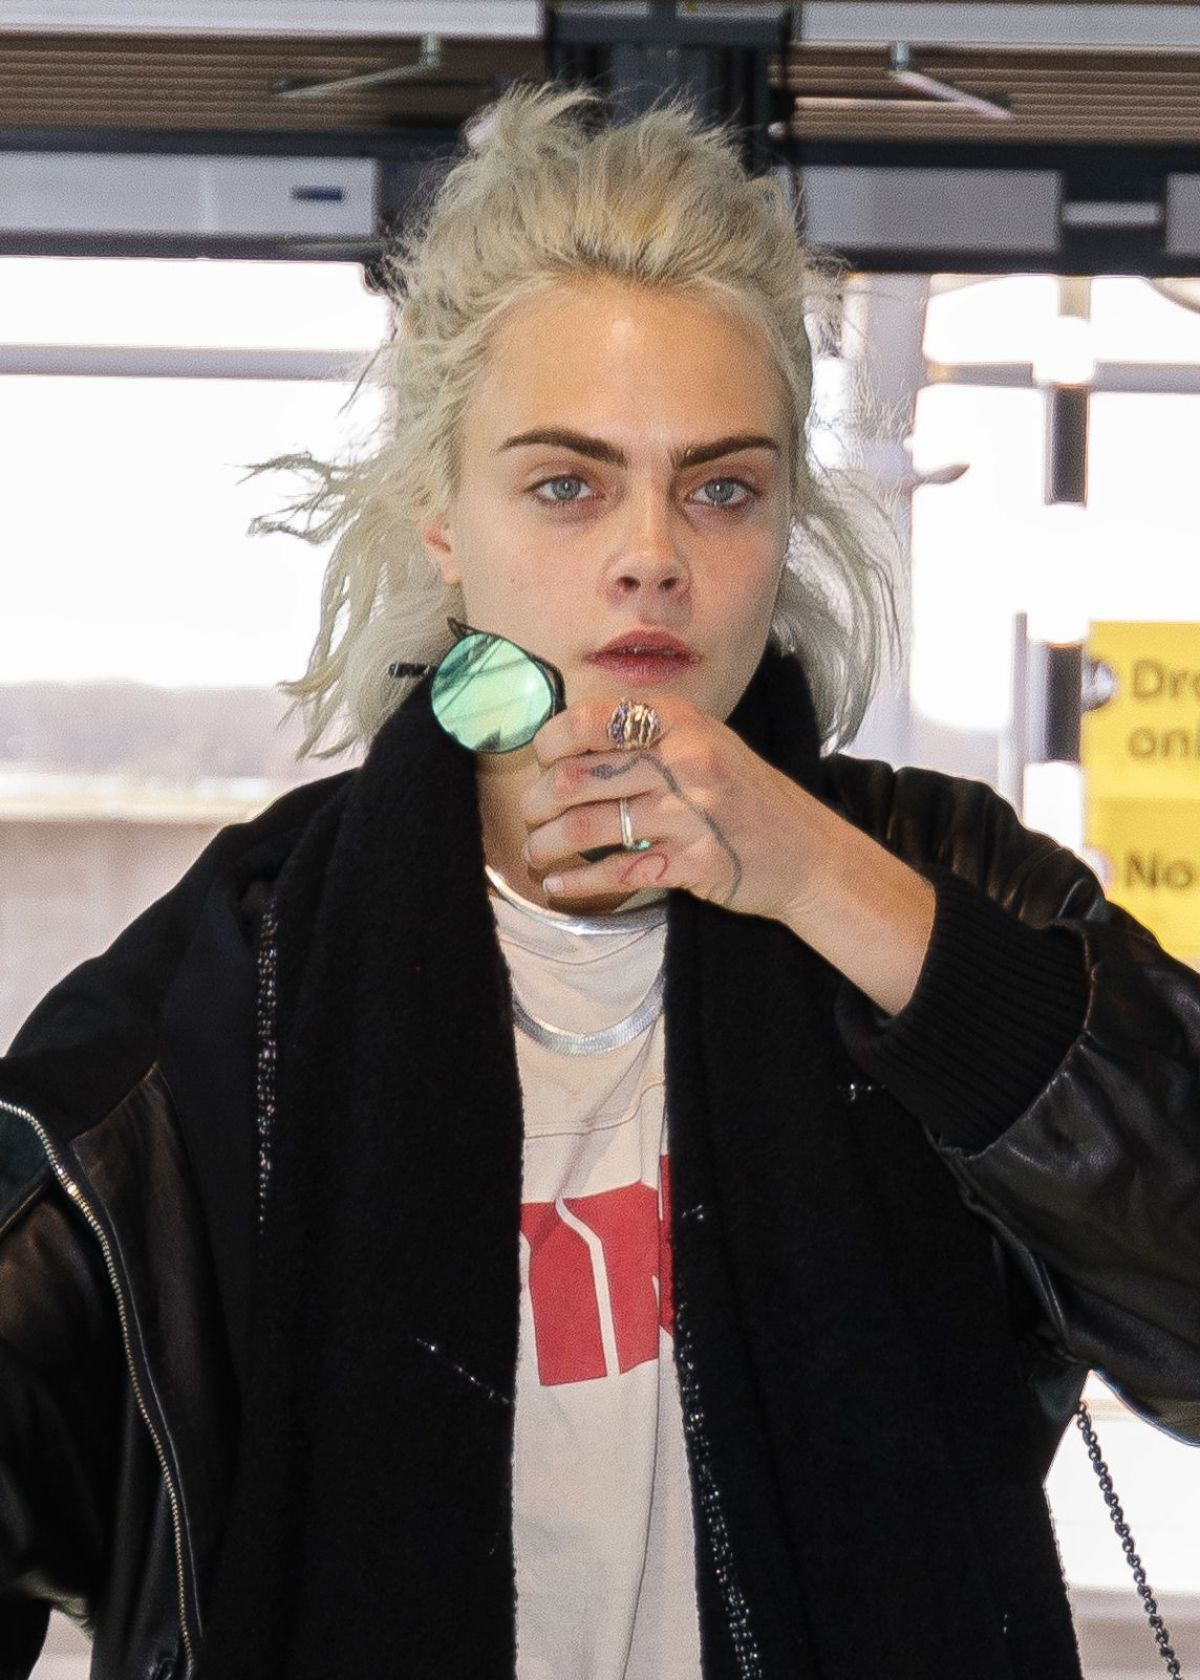 CARA DELEVINGNE at Heathrow Airport in London 03/26/2017 – HawtCelebs